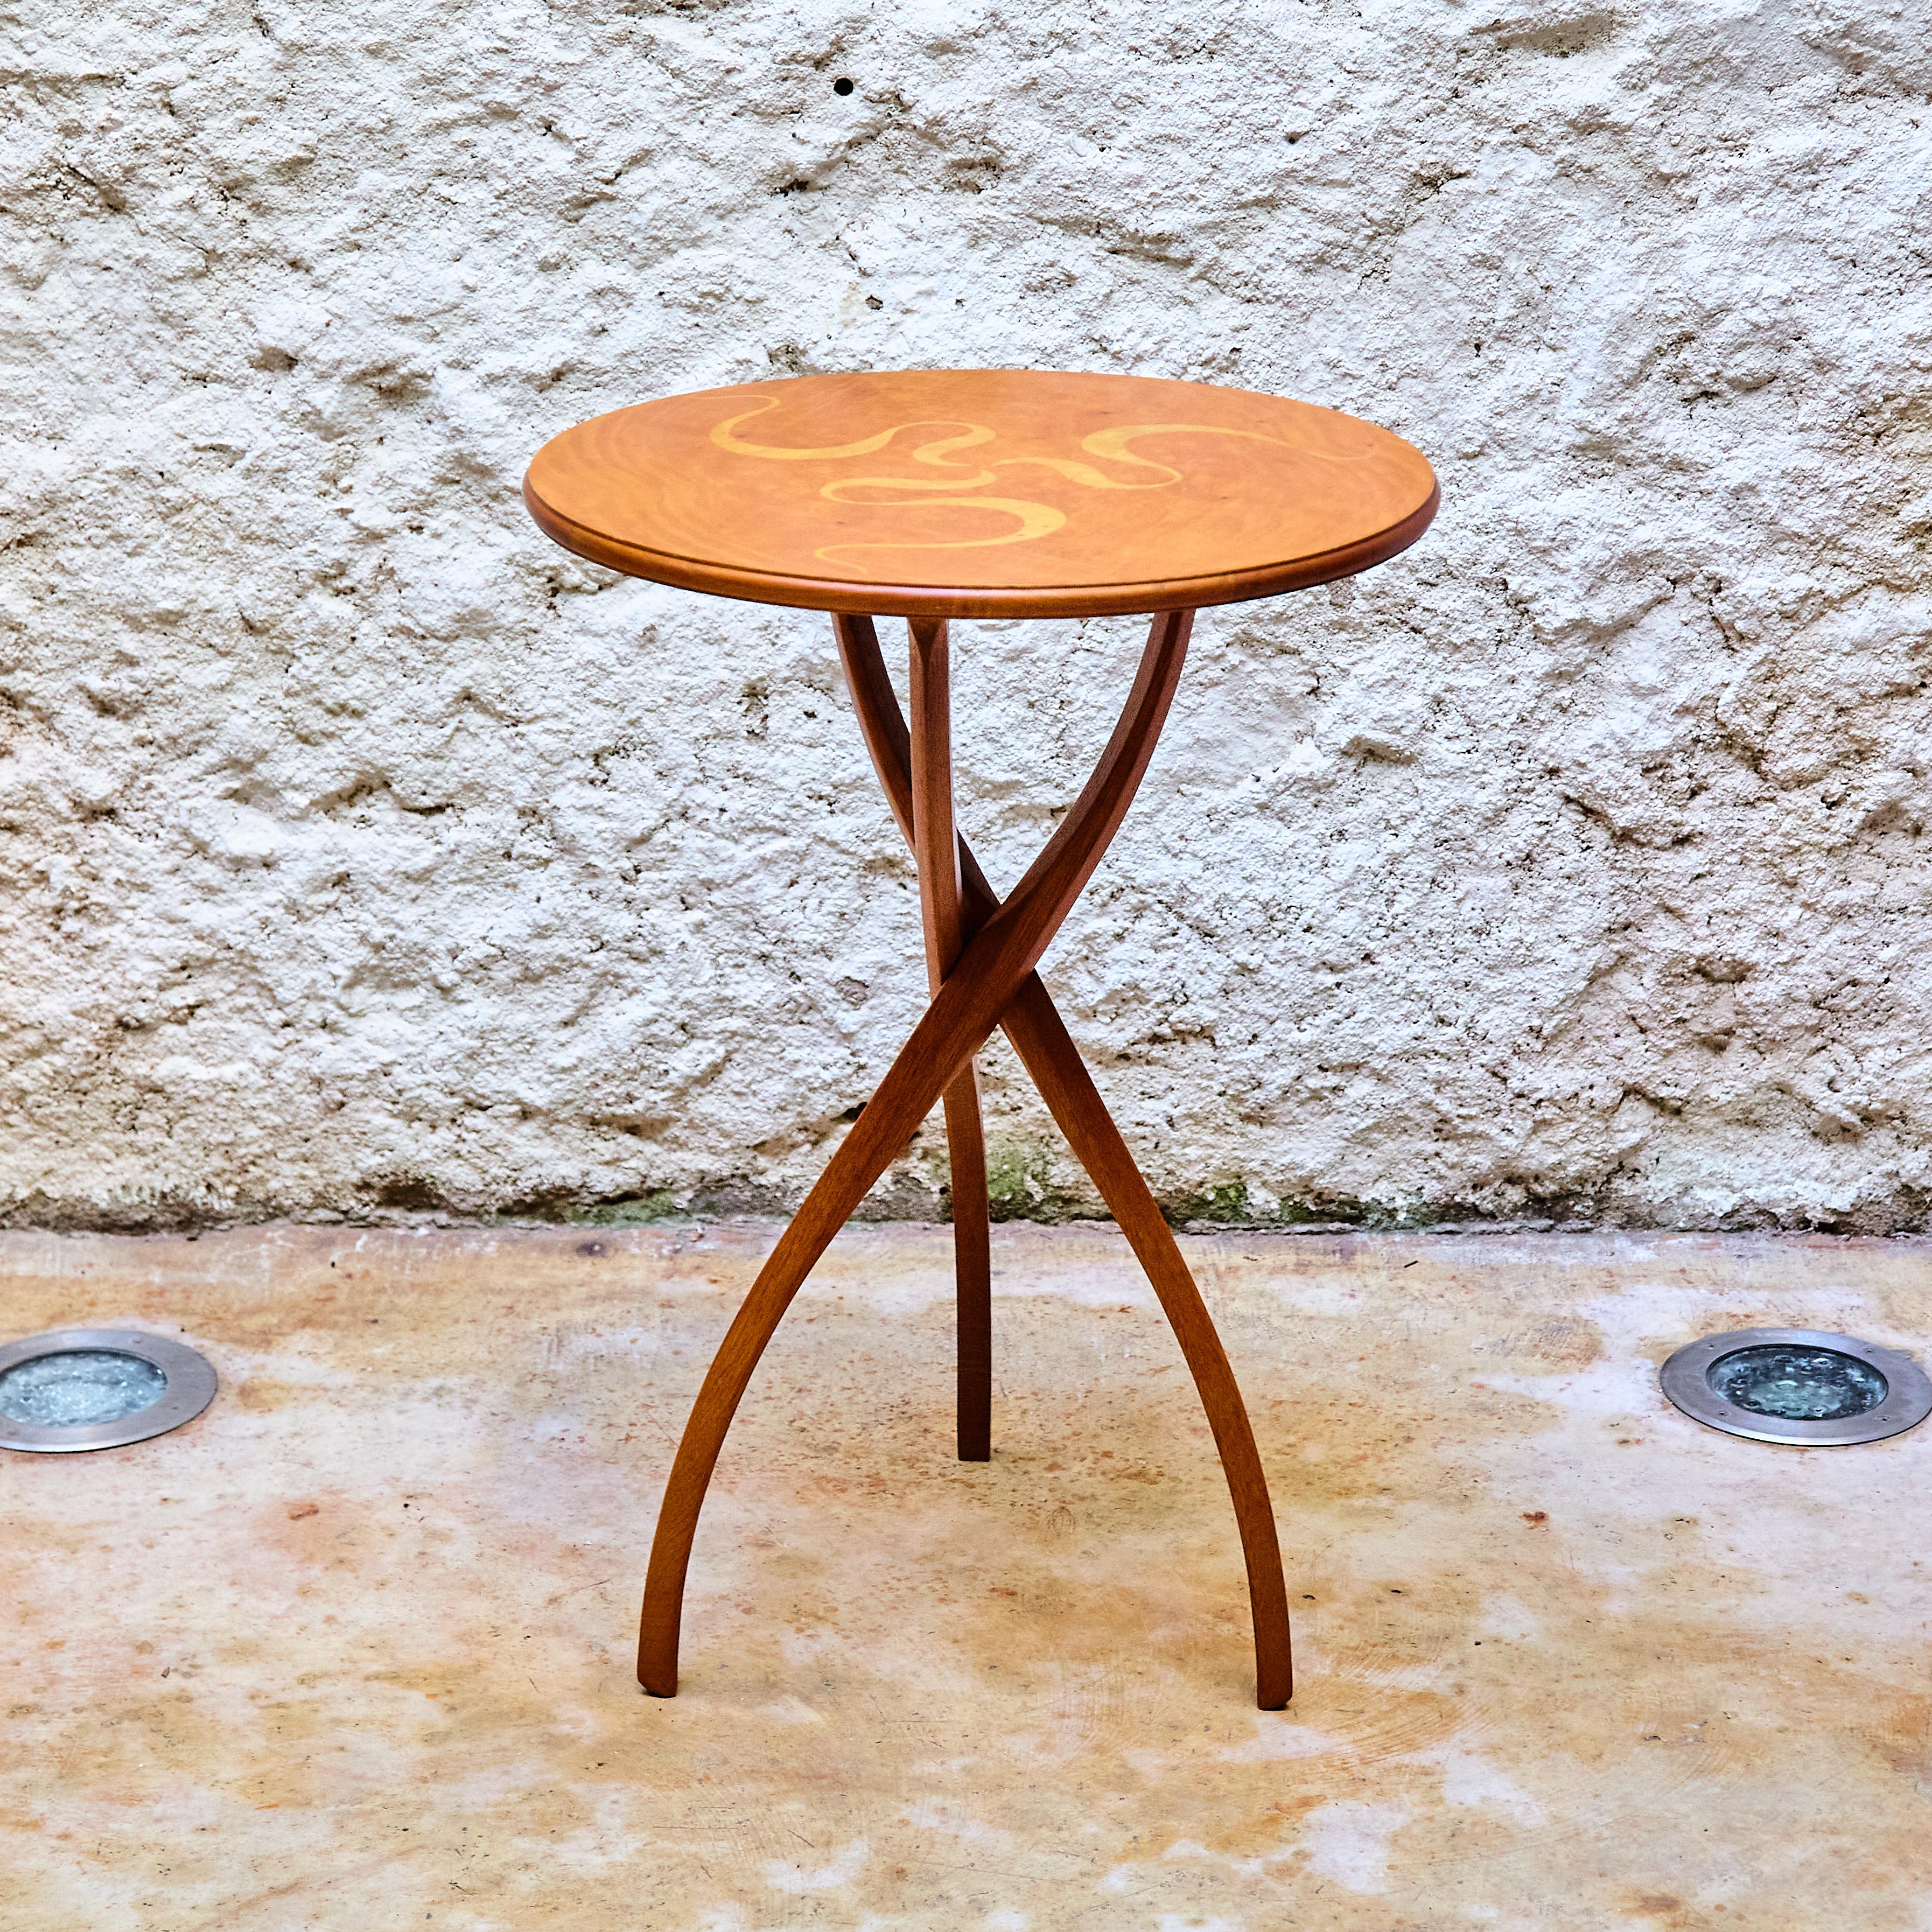 Oscar Tusquets Wood Side Table 'Vortice' for Carlos Jané, circa 1989 For Sale 3